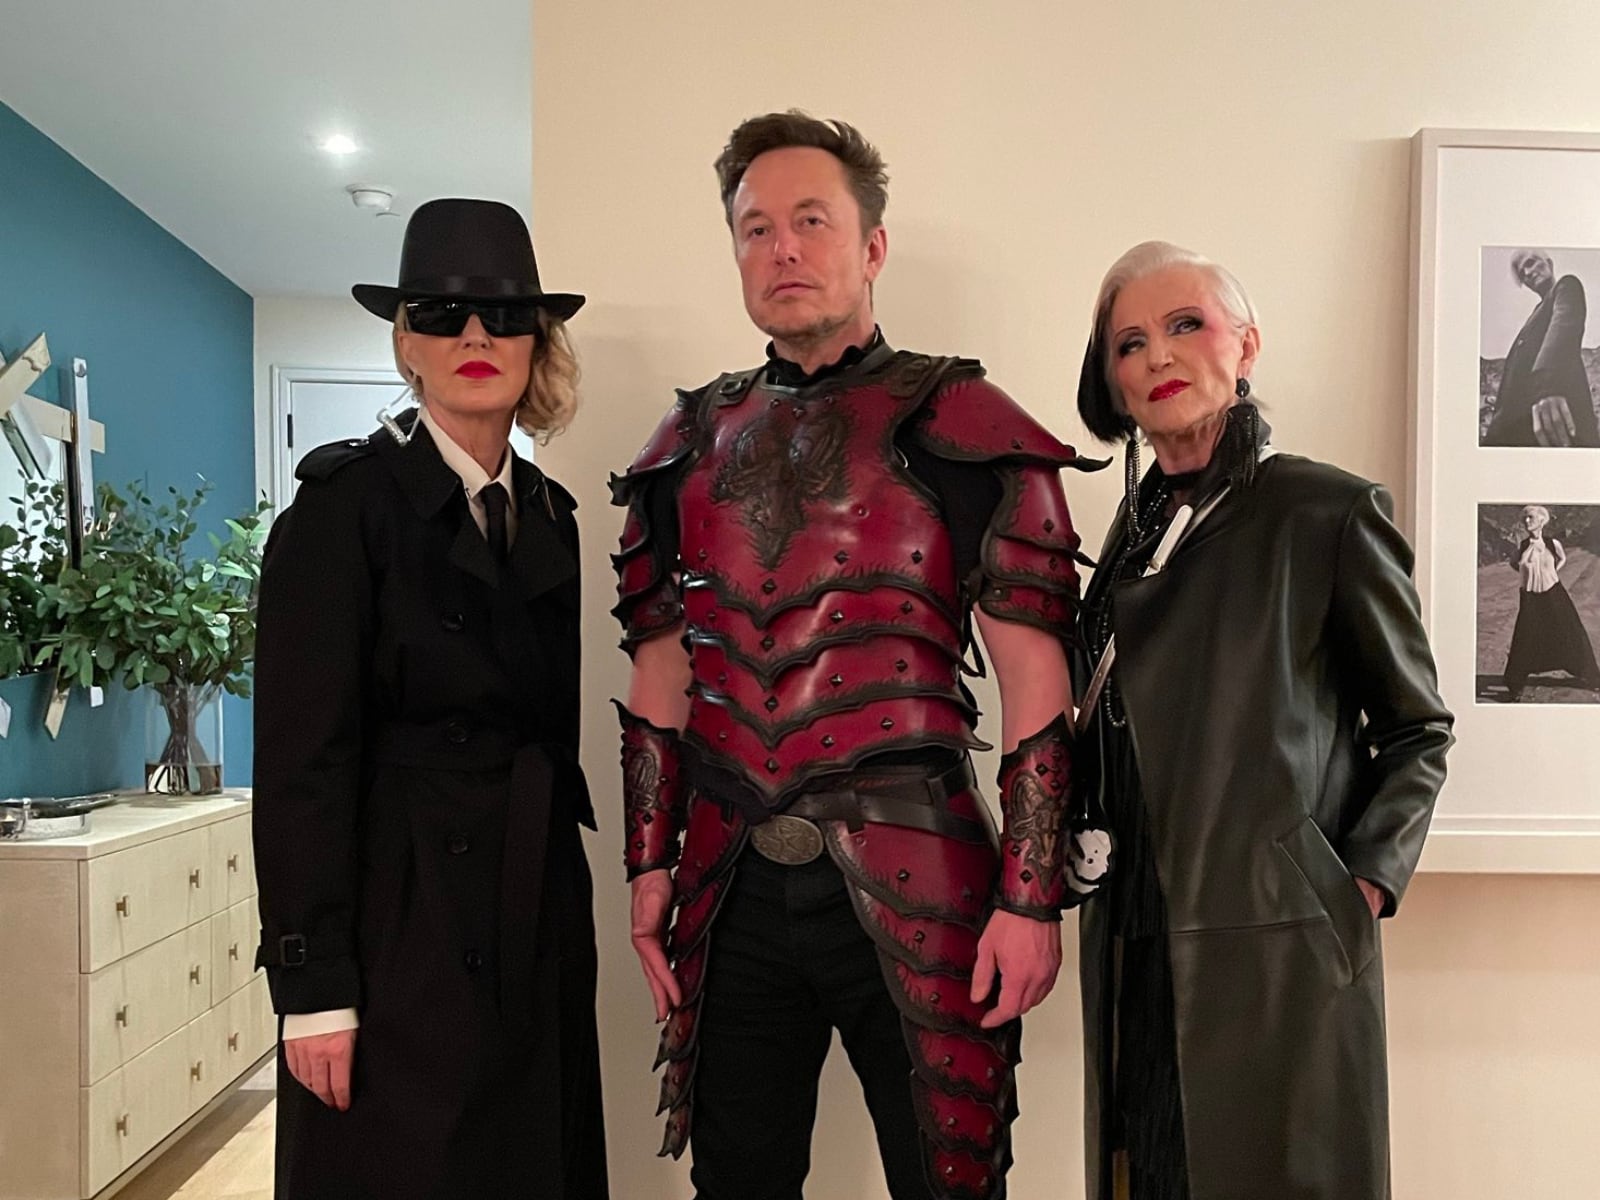 Elon Musk Turns into a Satanist For Halloween. Twitter is Not Happy